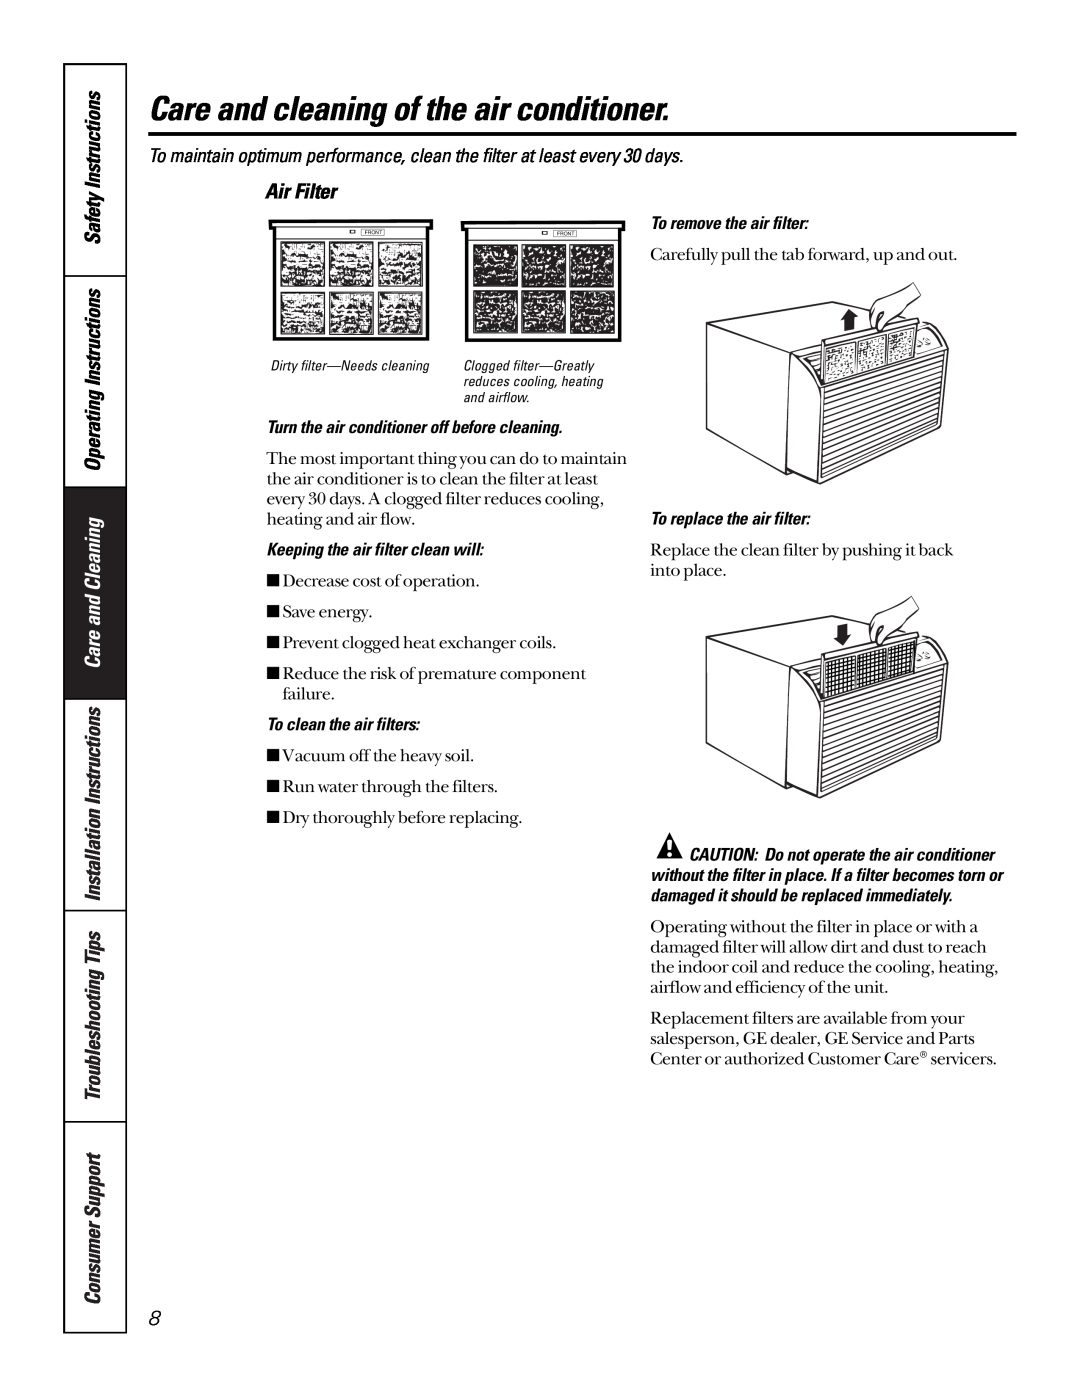 GE 10 AZA Instructions Safety Instructions, Air Filter, Care and cleaning of the air conditioner, To remove the air filter 